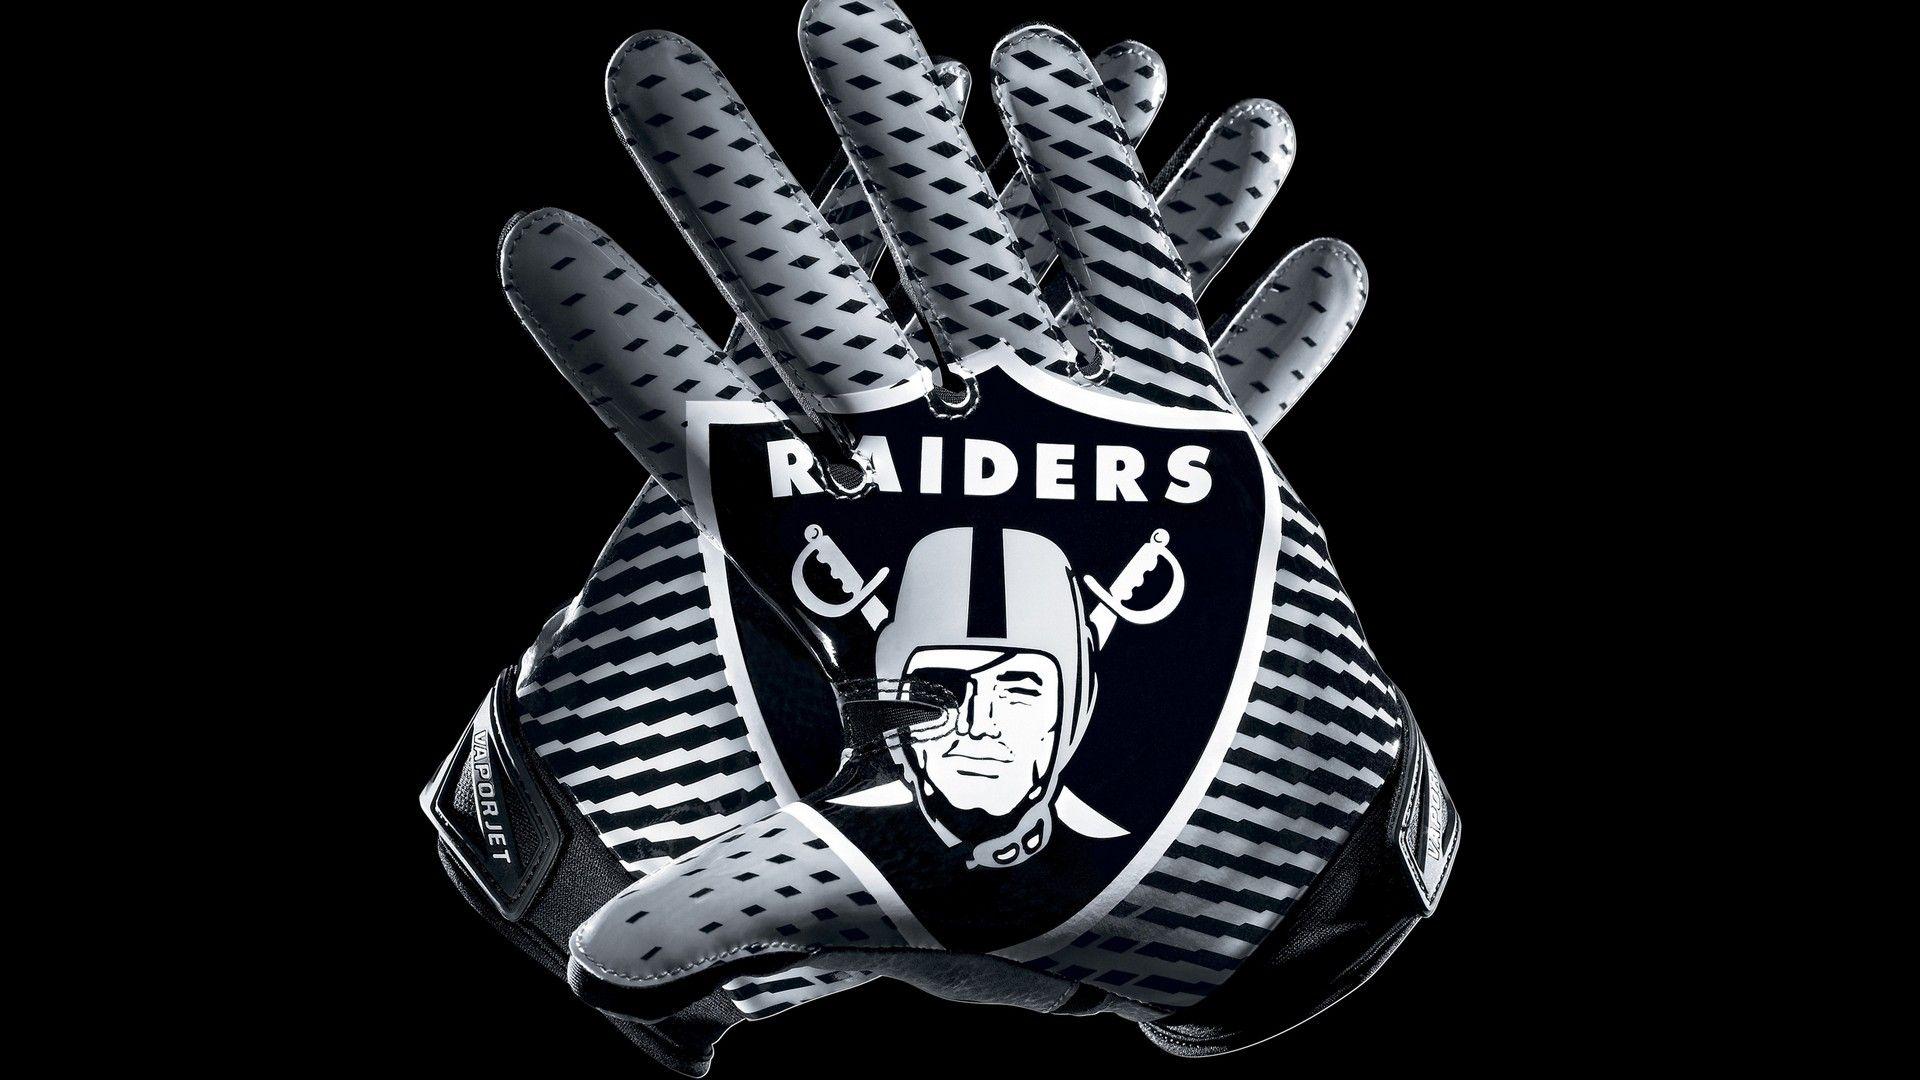 1920x1080 HD Backgrounds Oakland Raiders 2022 NFL Football Wallpapers | Football gloves, Raiders wallpaper, Nfl football gloves